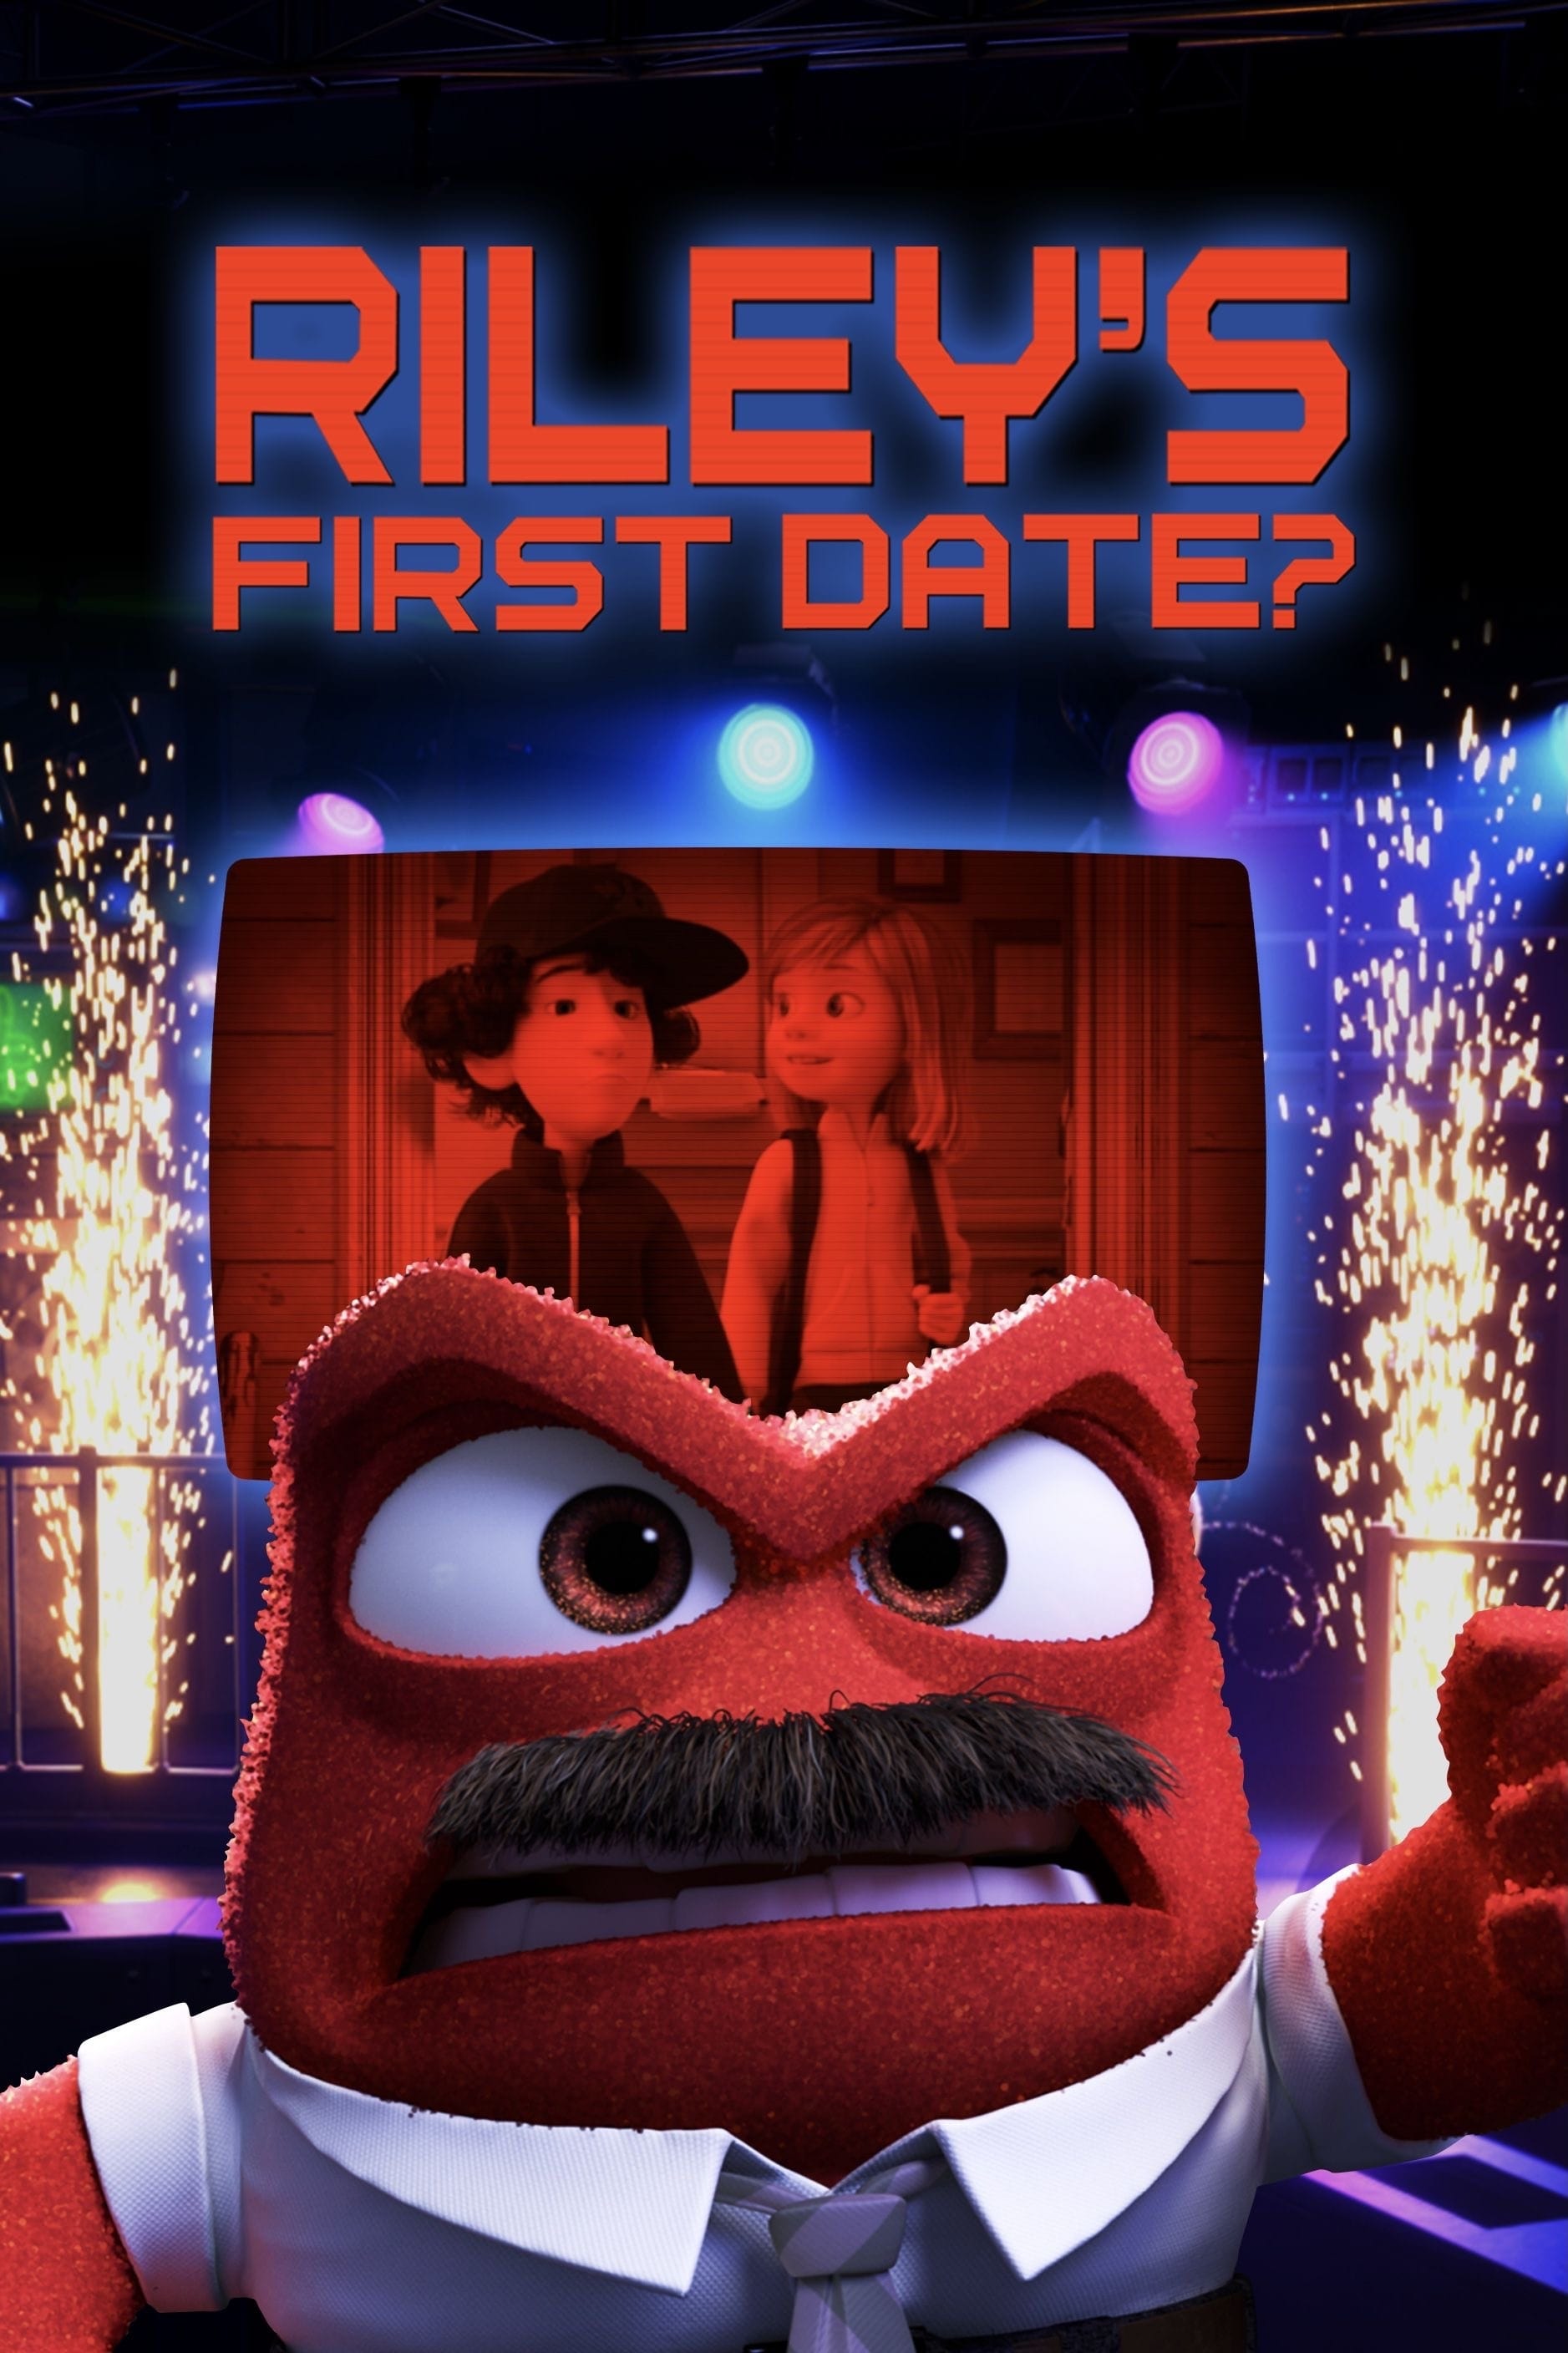 Riley's First Date? (2015)